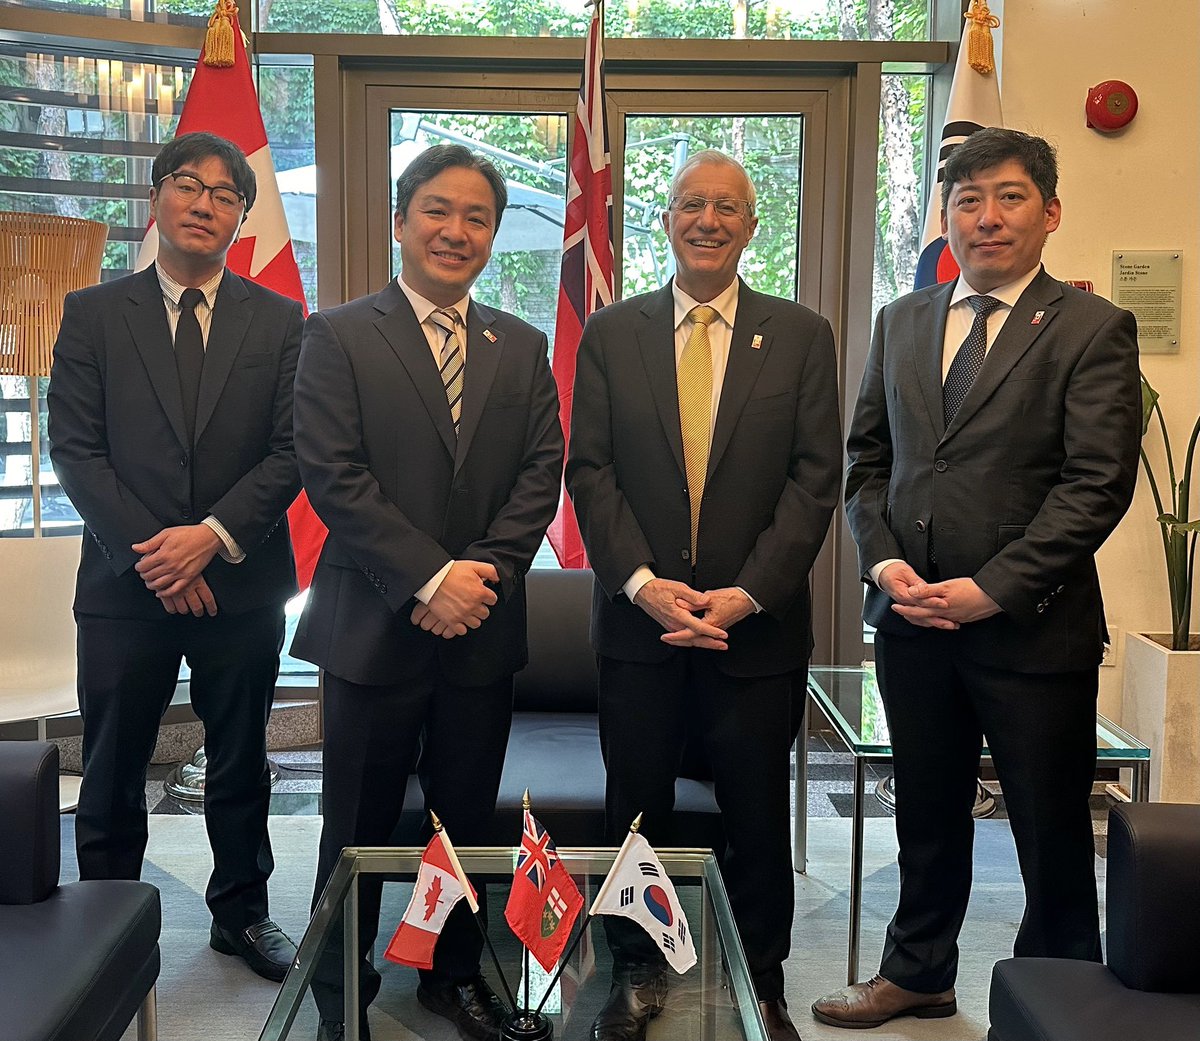 As we conclude the first part of our international #trade mission to #Korea, we want to thank the incredible team at our Korean Trade and Investment Office. Their hard work is attracting exciting new investments to #Ontario and diversifying our economic footprint!